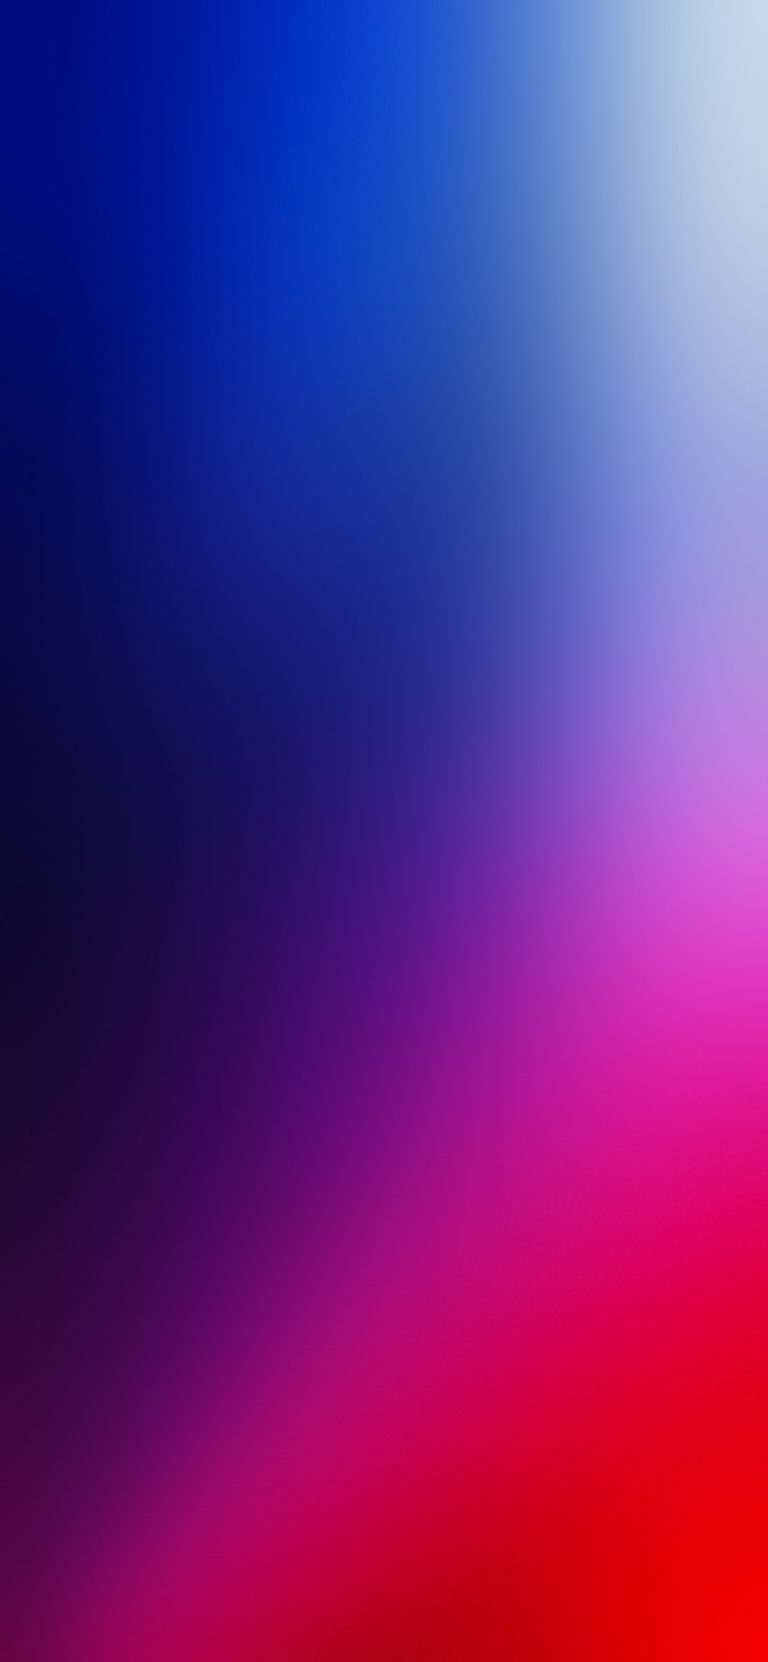 Fusion Gradient (Reflected) by @AR72014 on Twitter | Zollotech